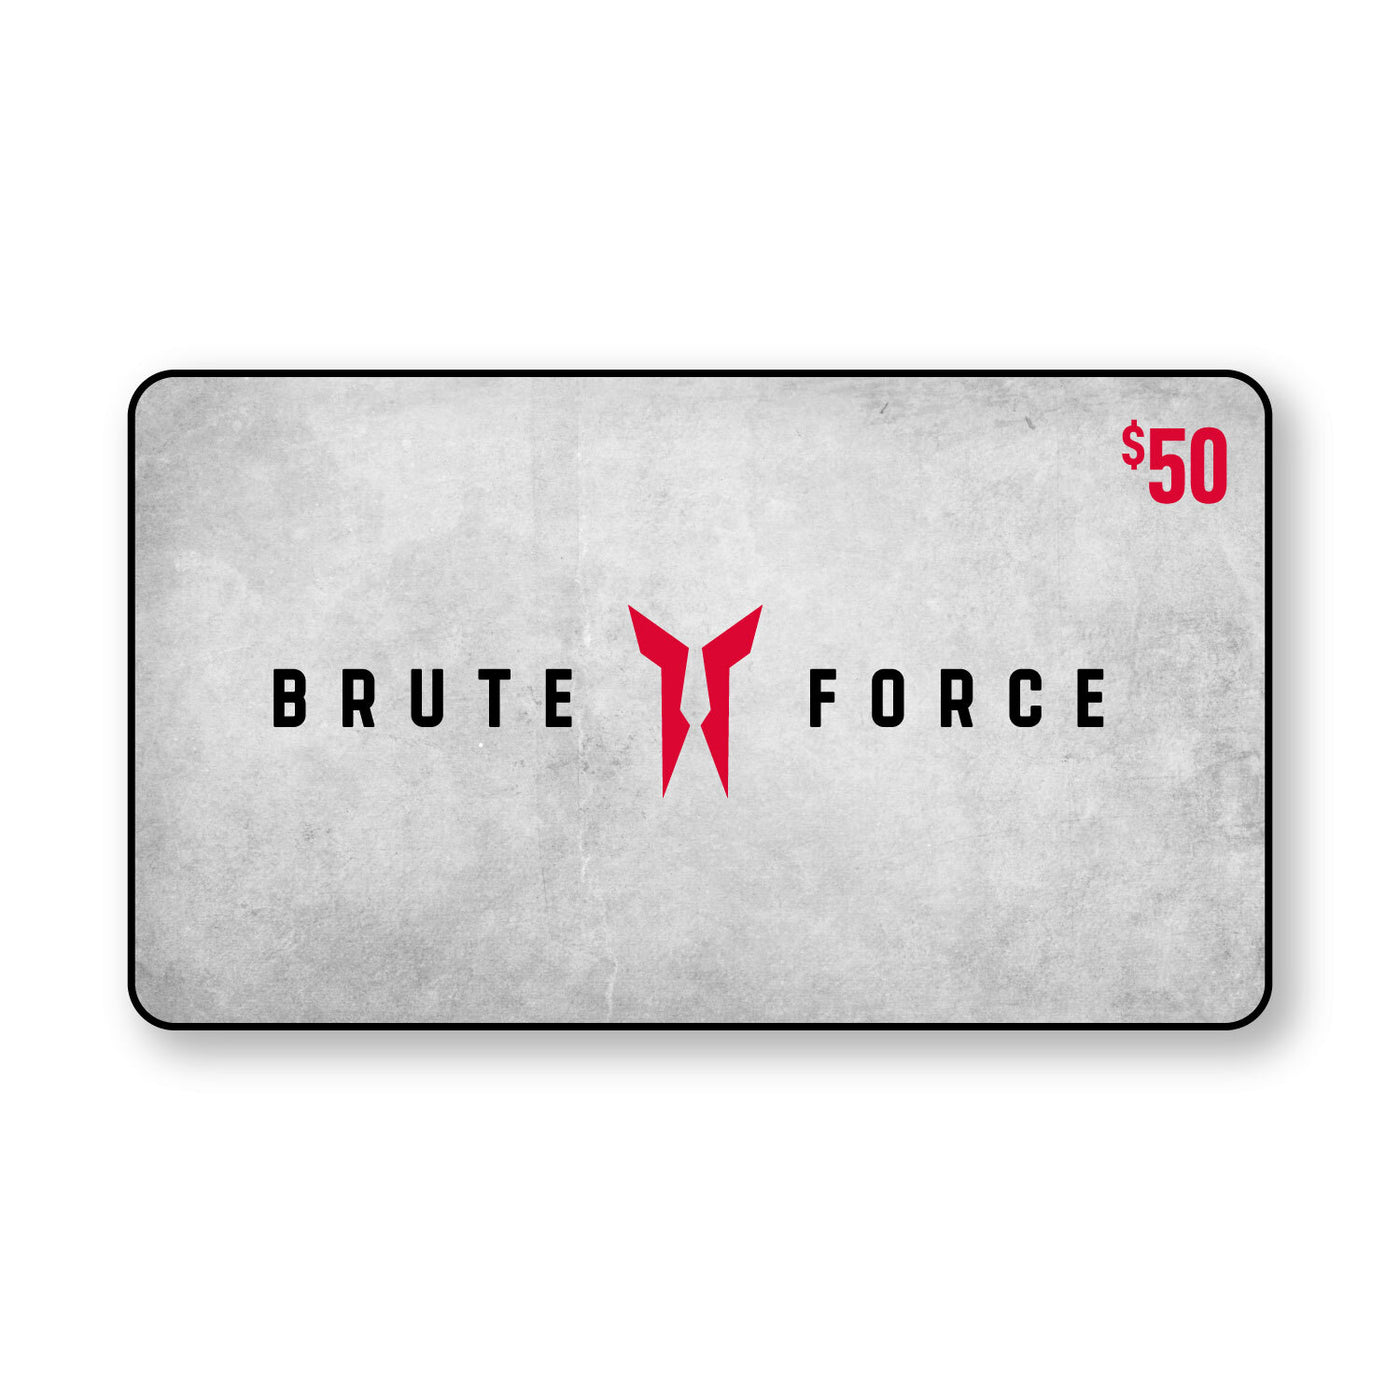 Brute Force E-Gift Cards - Brute Force Training